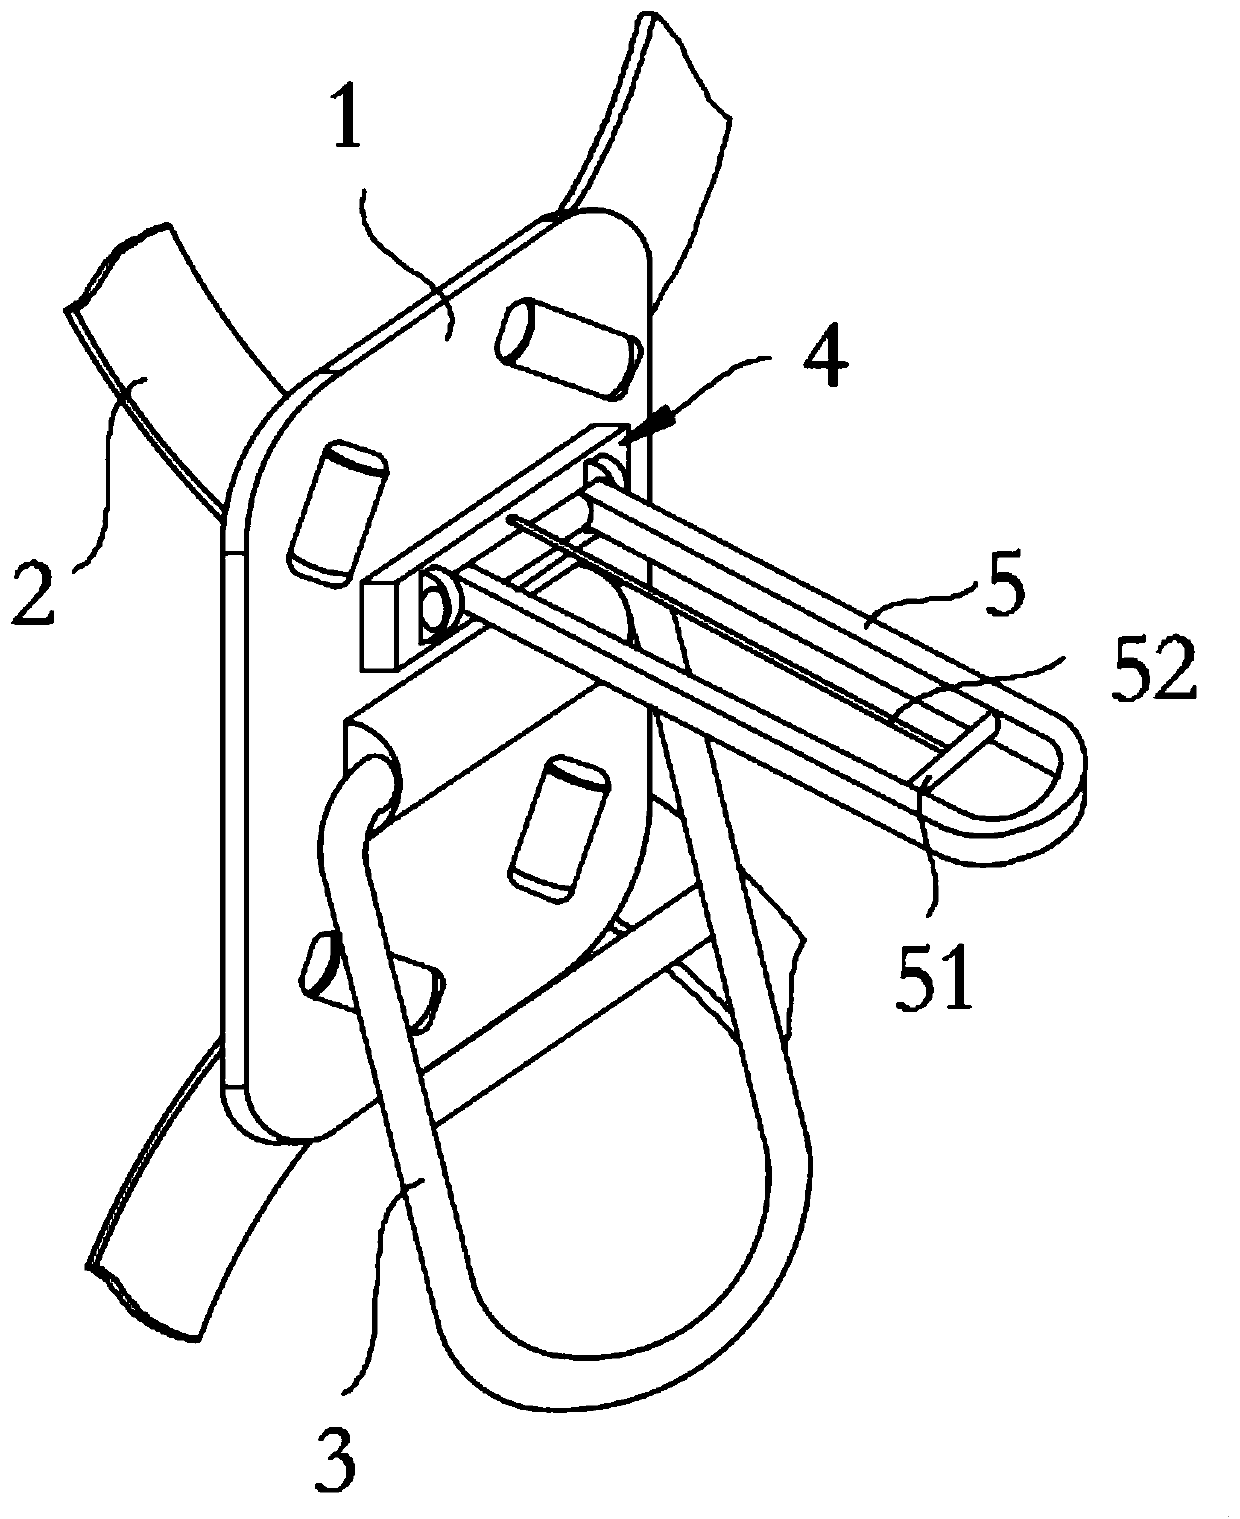 A dual-control safety belt with an alarm device